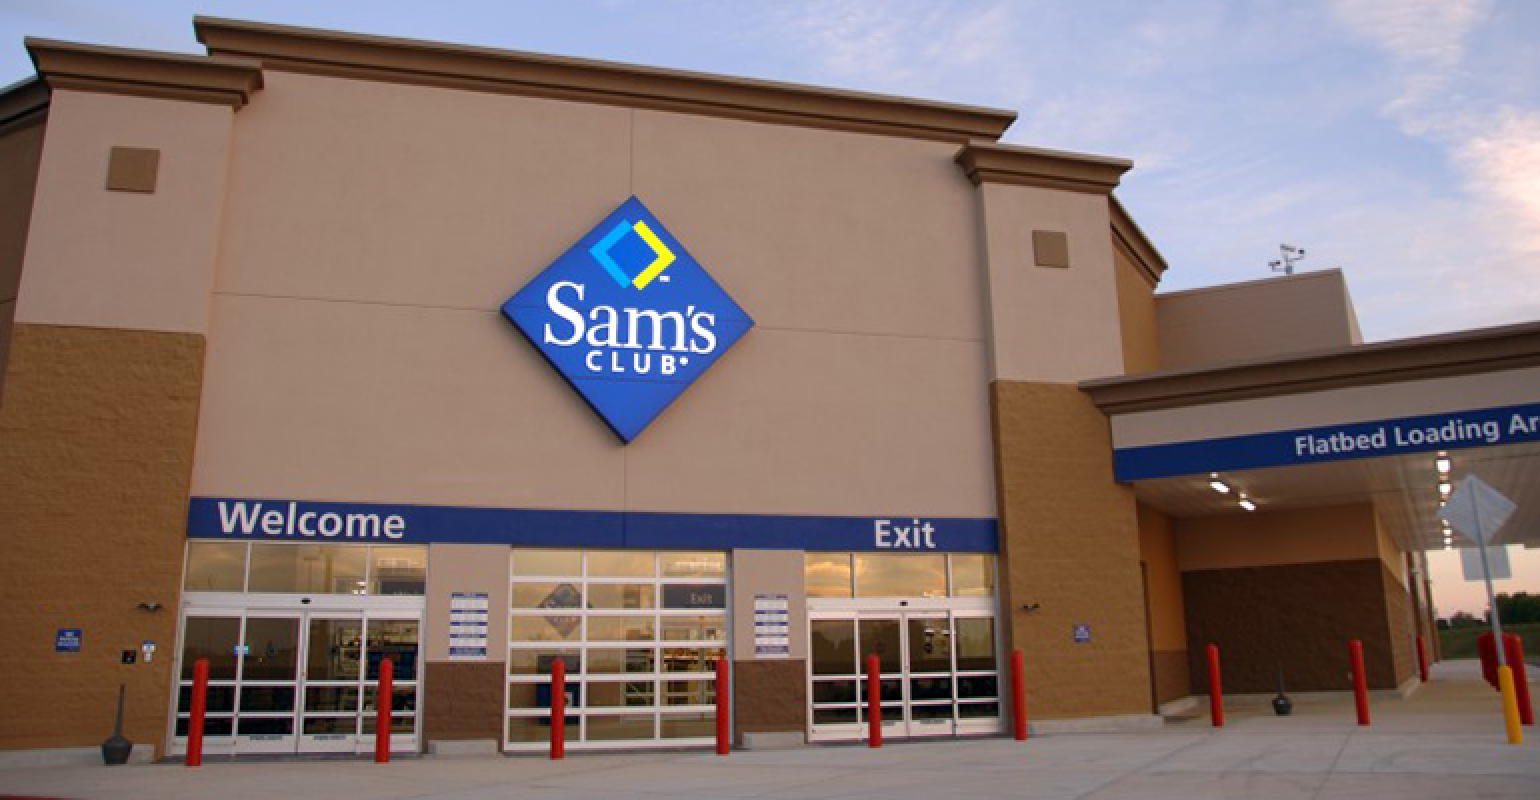 Walmart-owned Sam's Club plans to open new stores